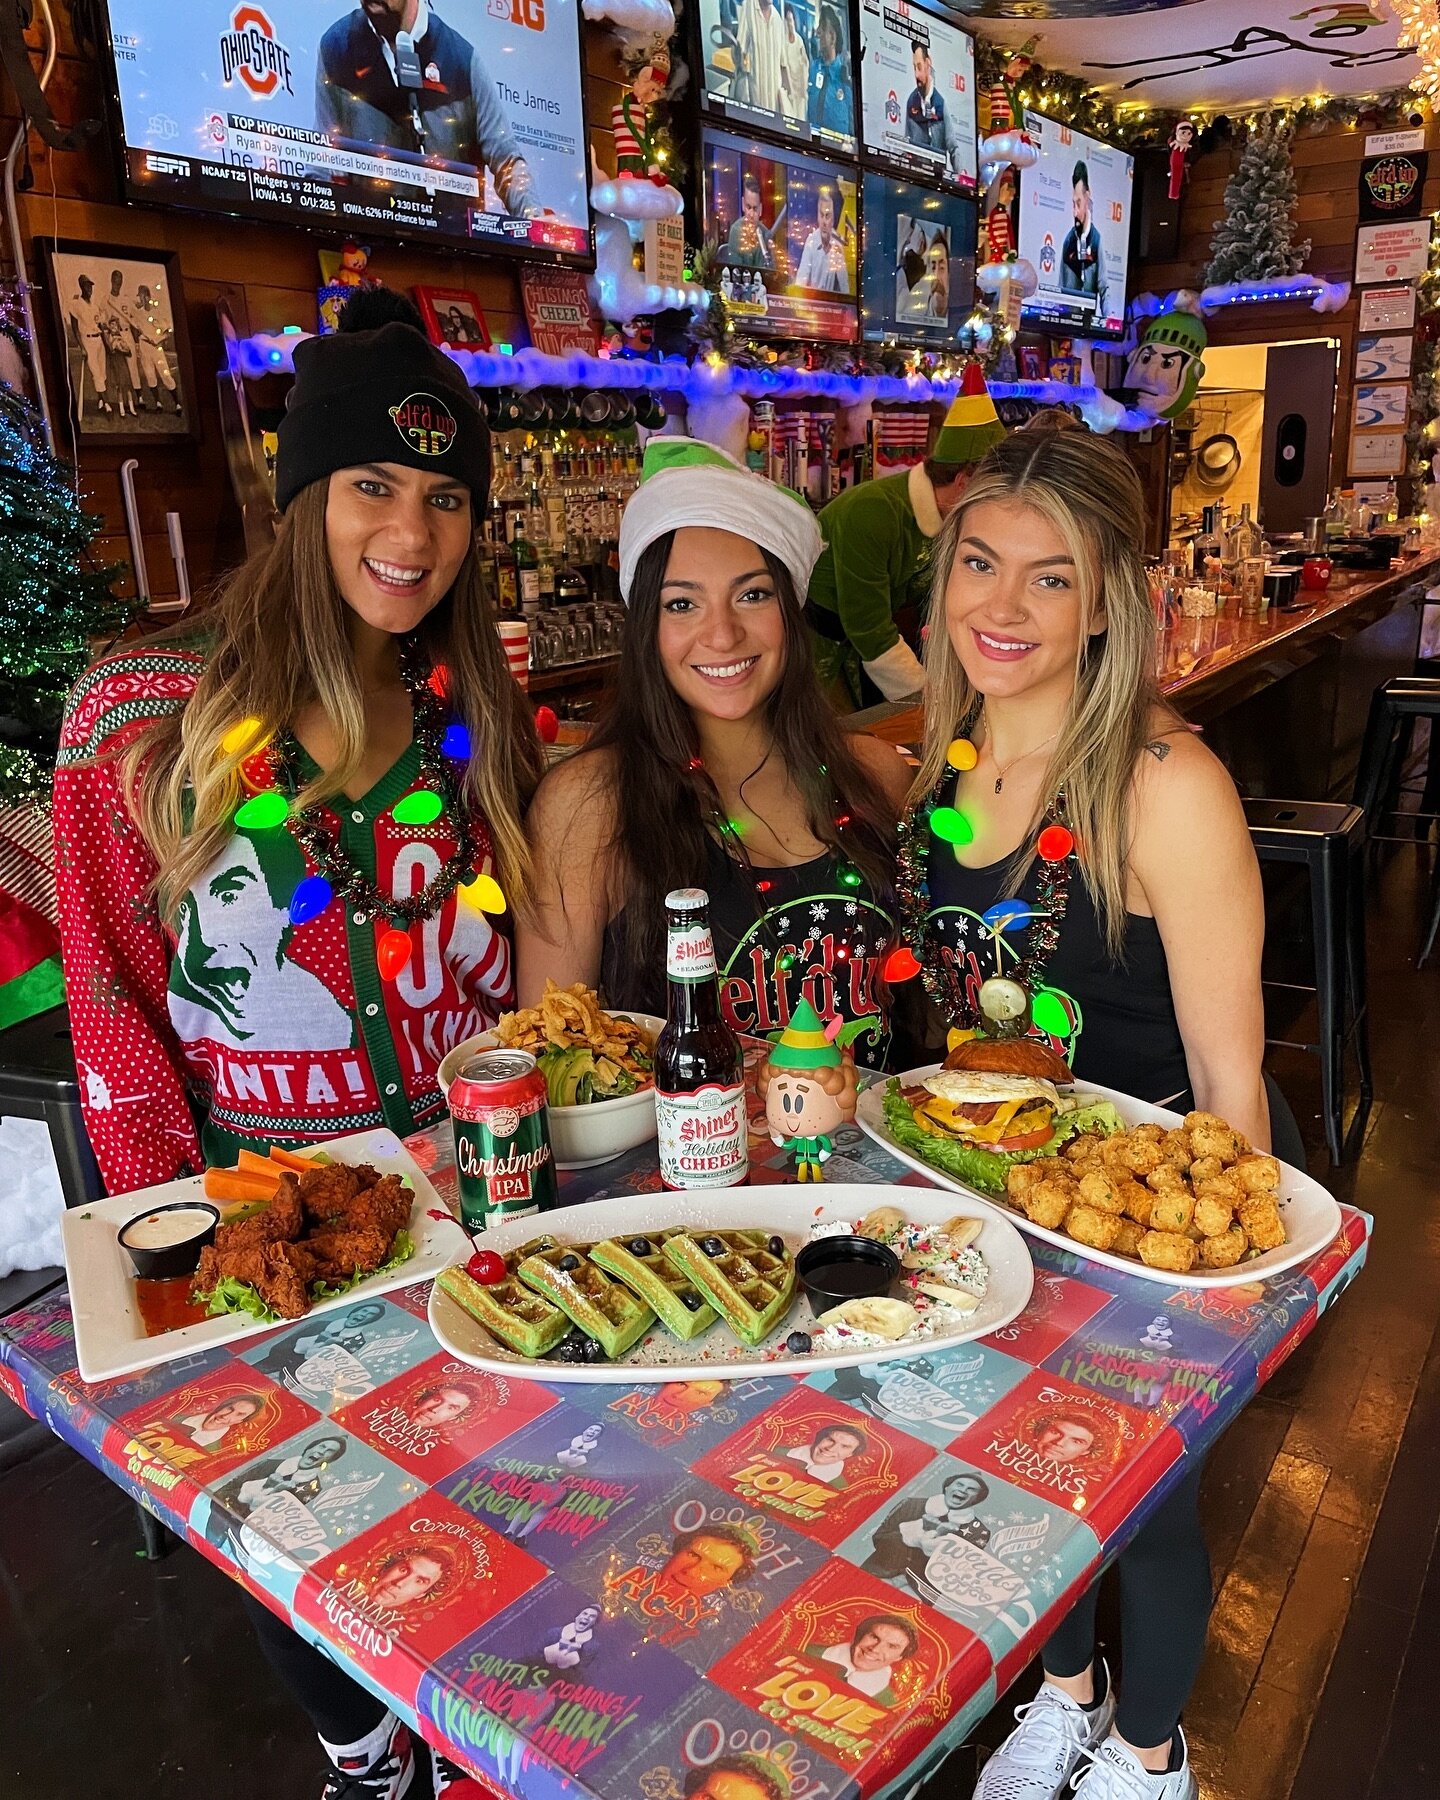 Treat every day like Christmas! 🎄 The holiday cheer continues. ✨ We&rsquo;re open at 11AM every day this week &amp; 10:30AM this weekend. 🎉 Come see us! 

#elfdup #buddy #wrigleyville